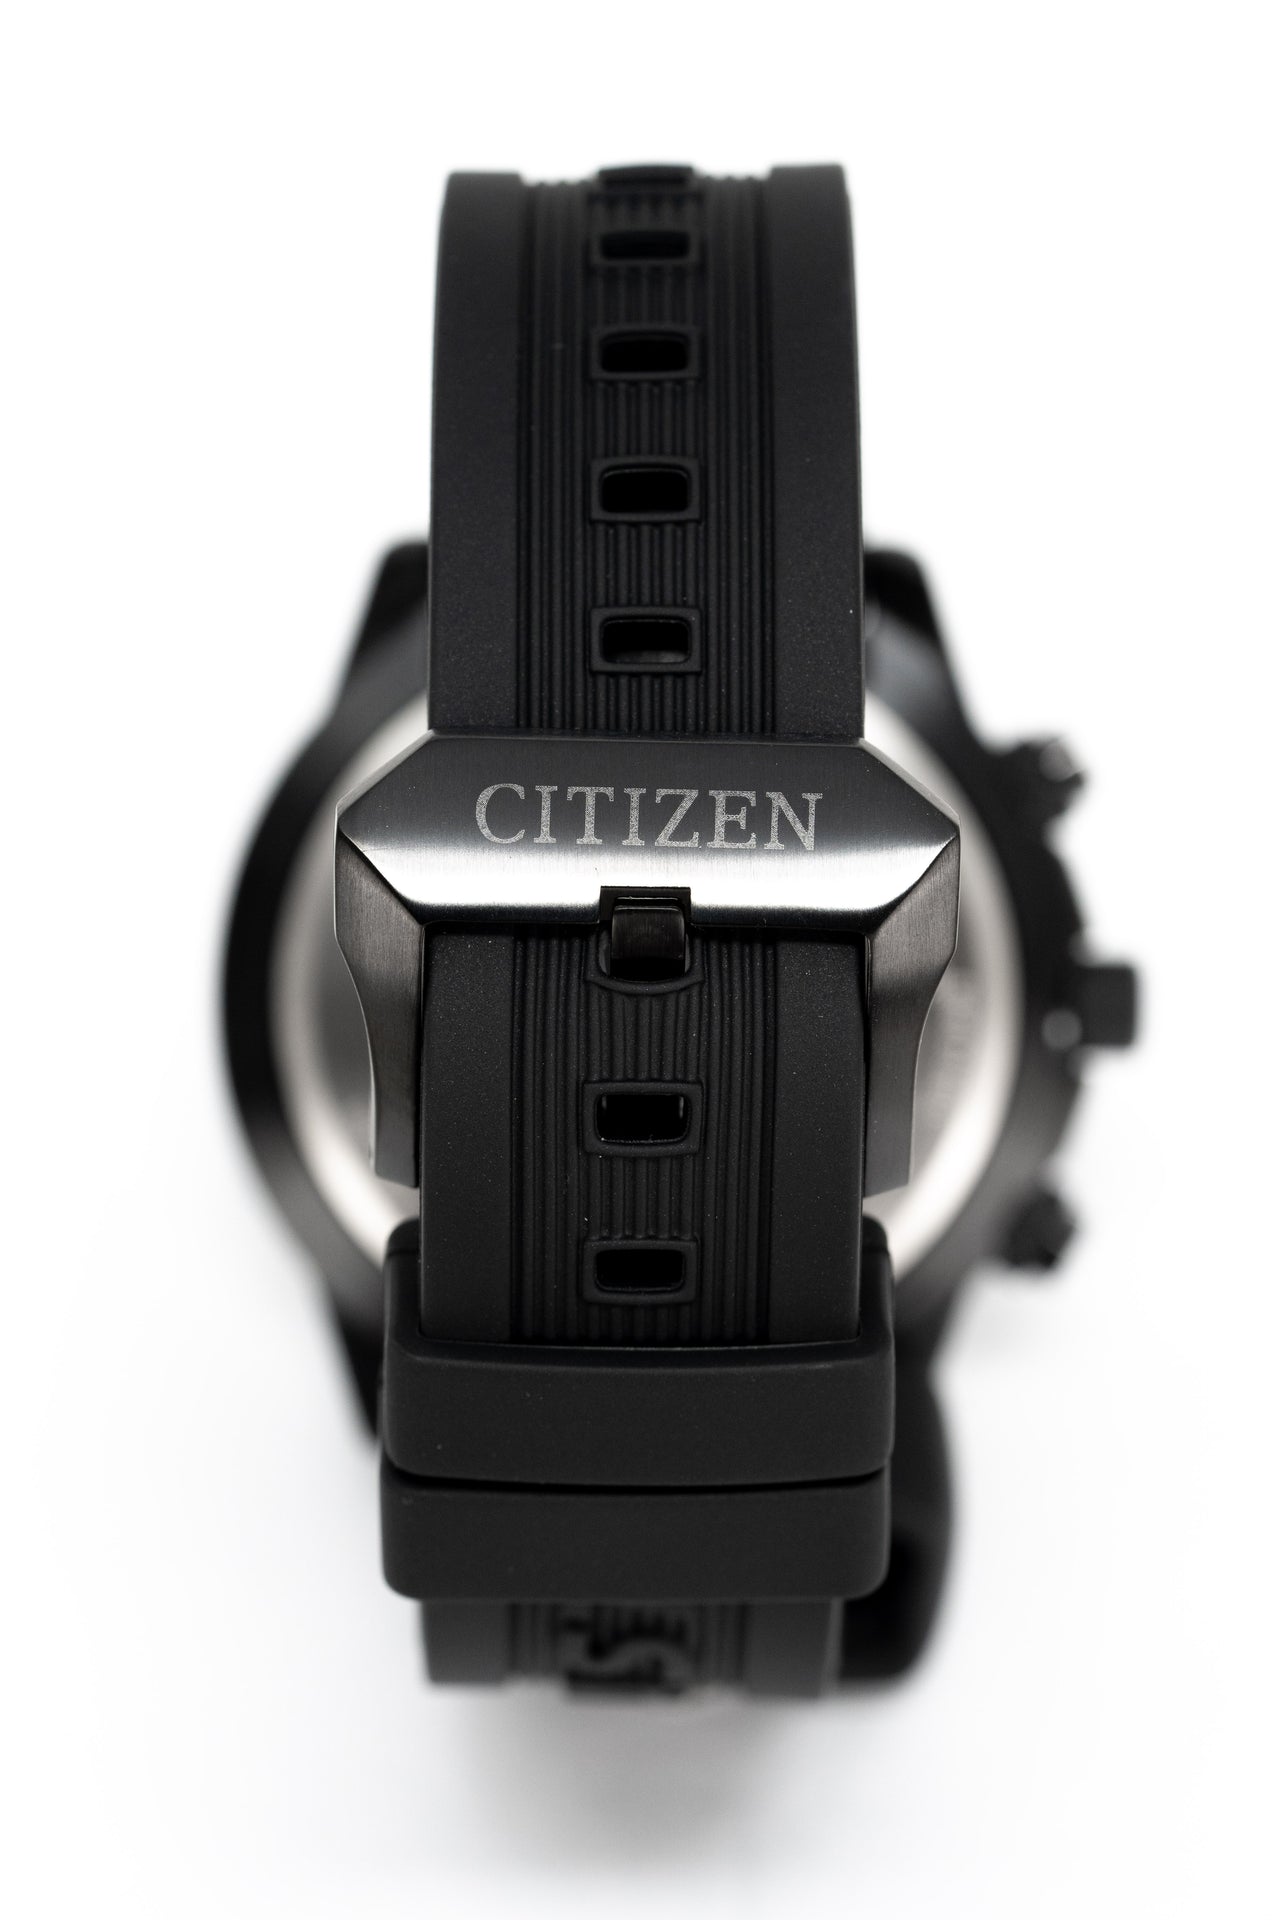 Controlled – Bl Citizen Promaster Chrono Men\'s Radio & Sky Crystals Watch Watches Eco-Drive